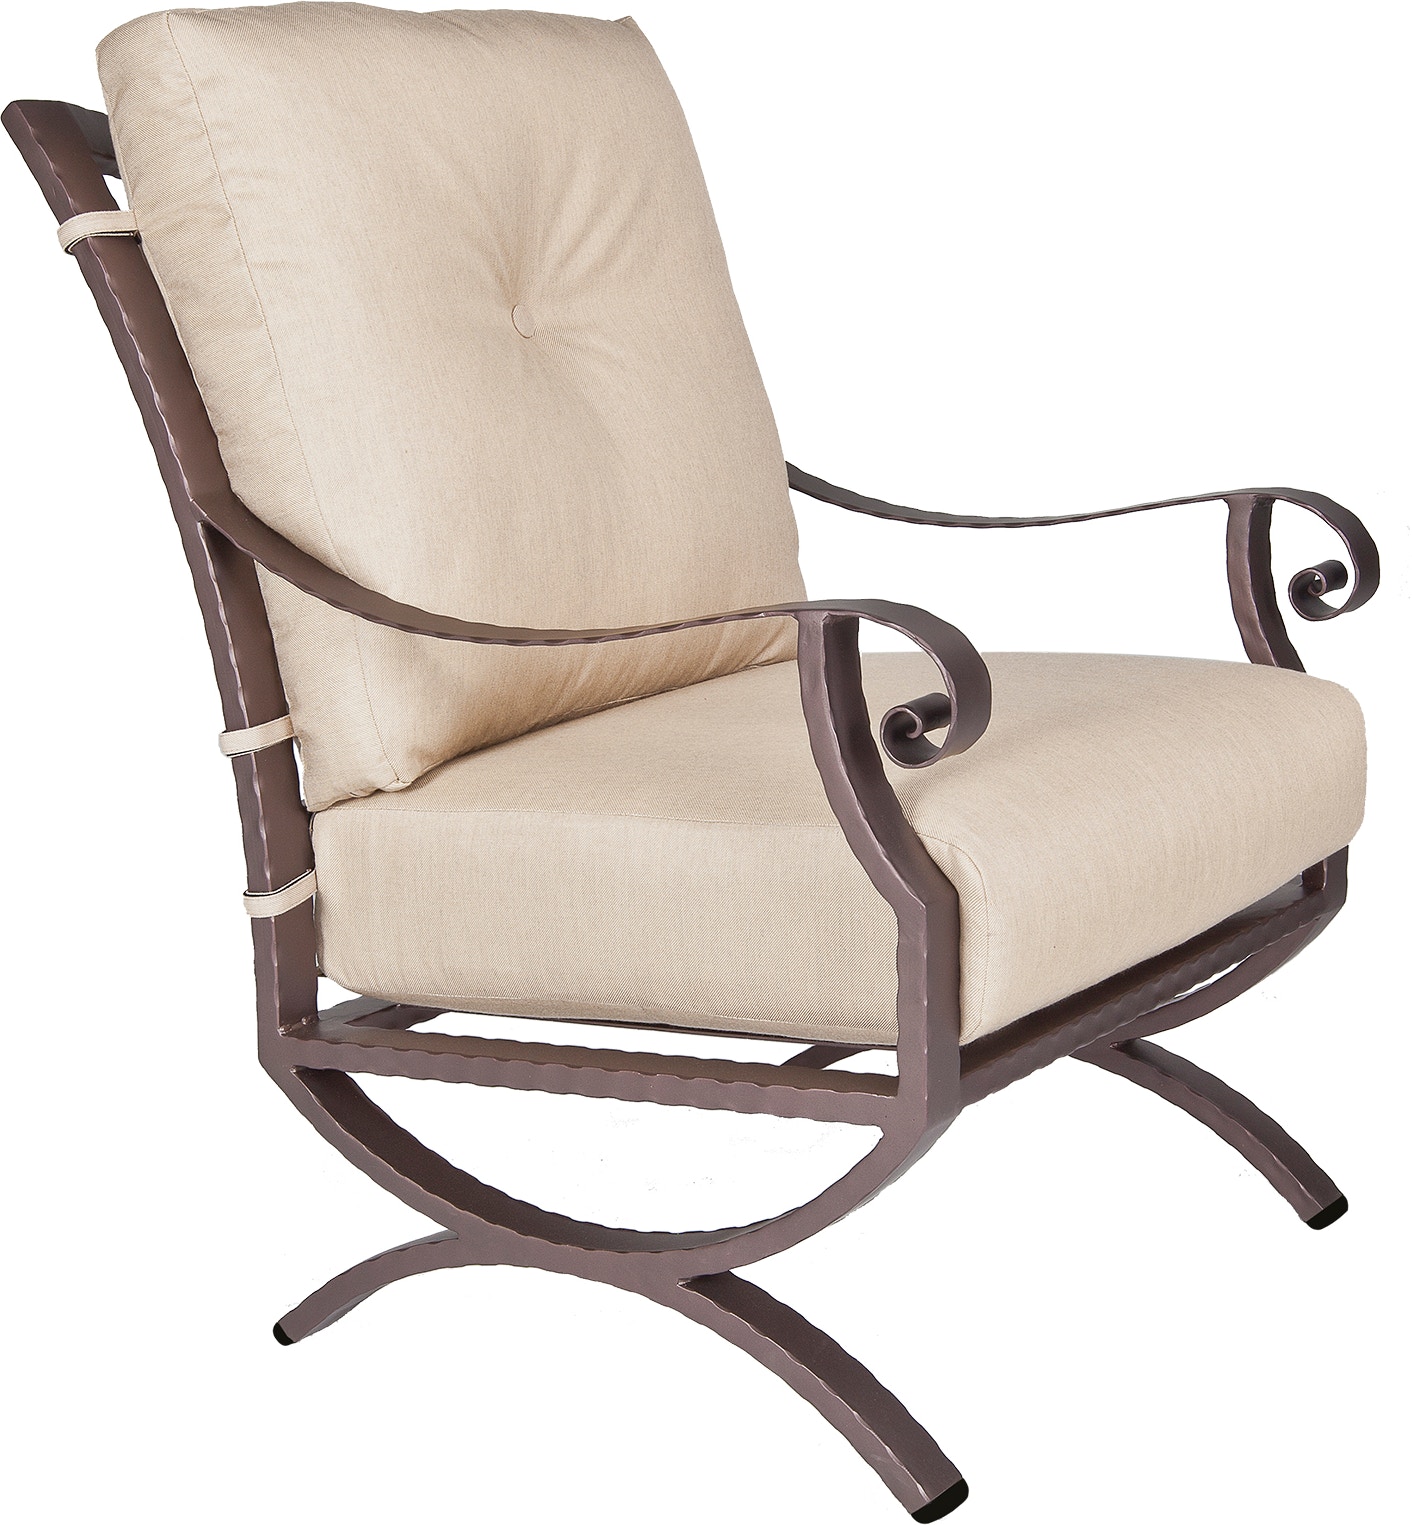 OW Lee Furniture 32125-CC OutdoorPatio Luna Lounge Chair